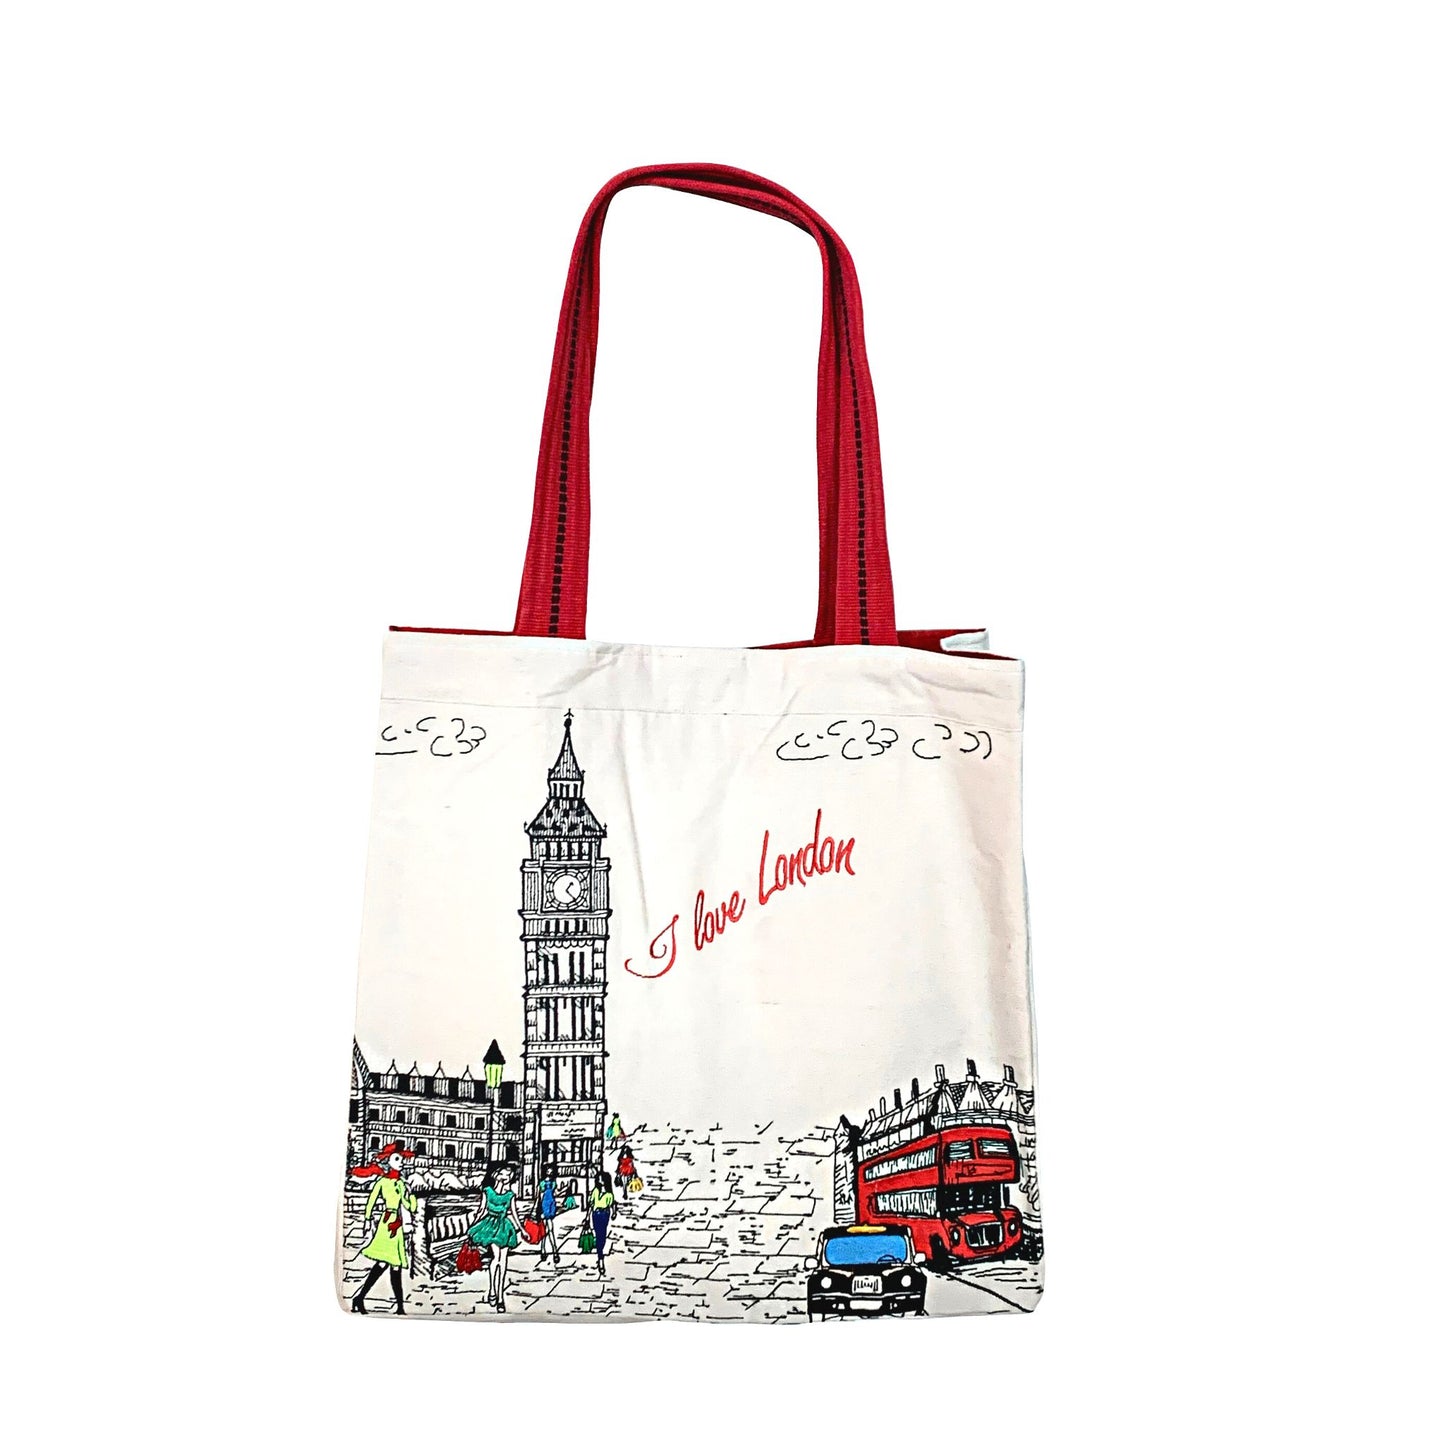 Embroidered City Artistry Collection Tote Bag - London